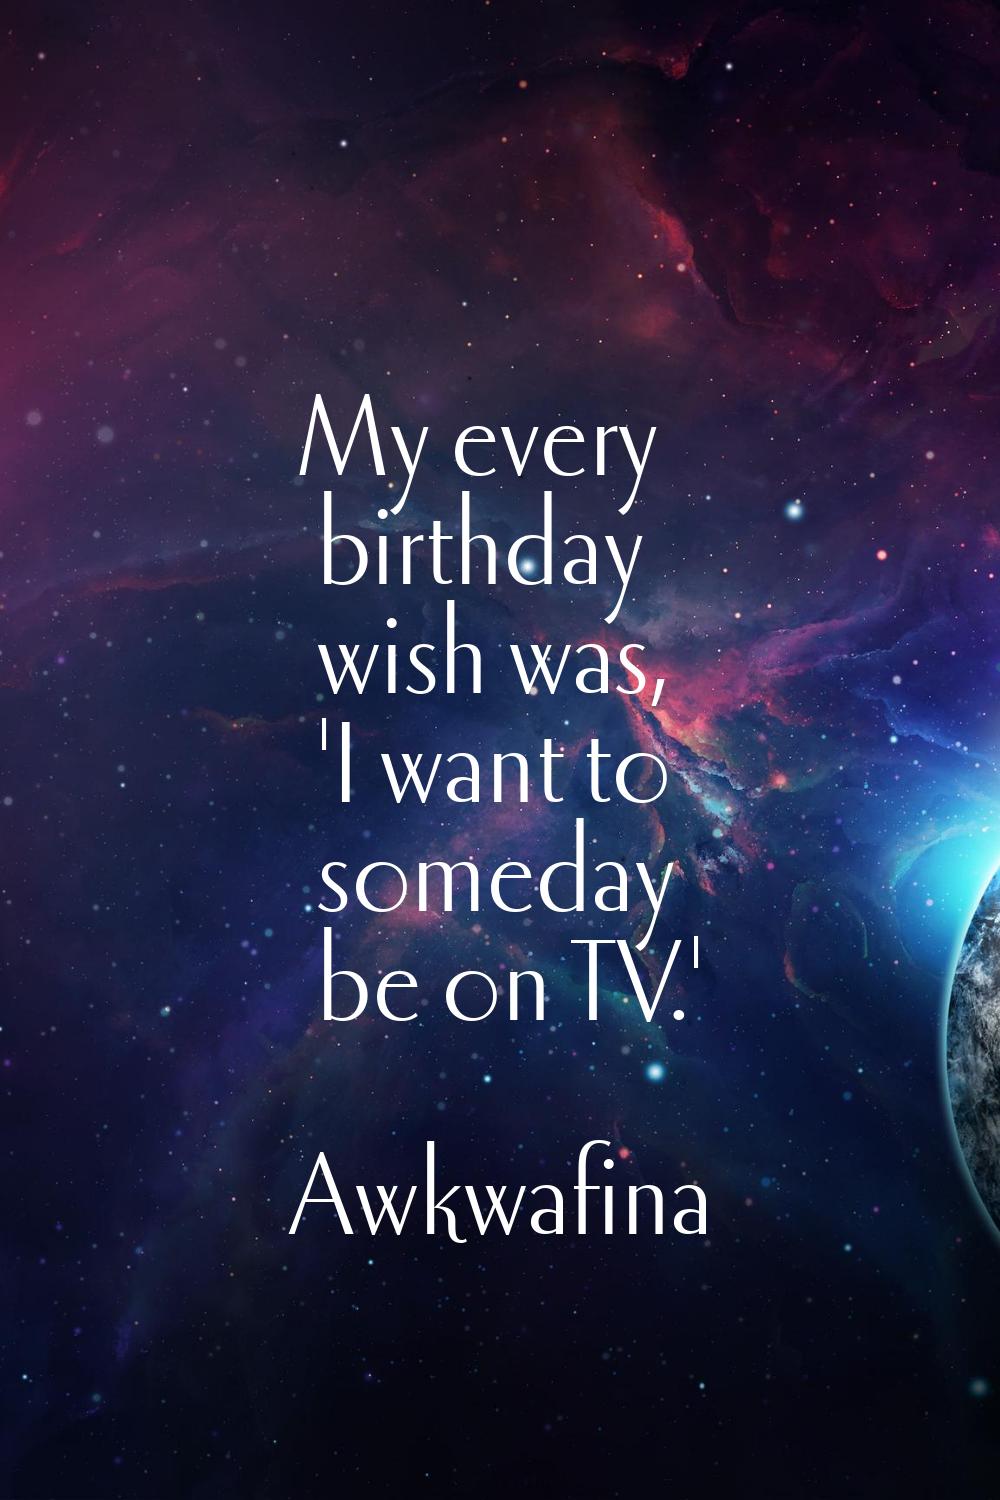 My every birthday wish was, 'I want to someday be on TV.'